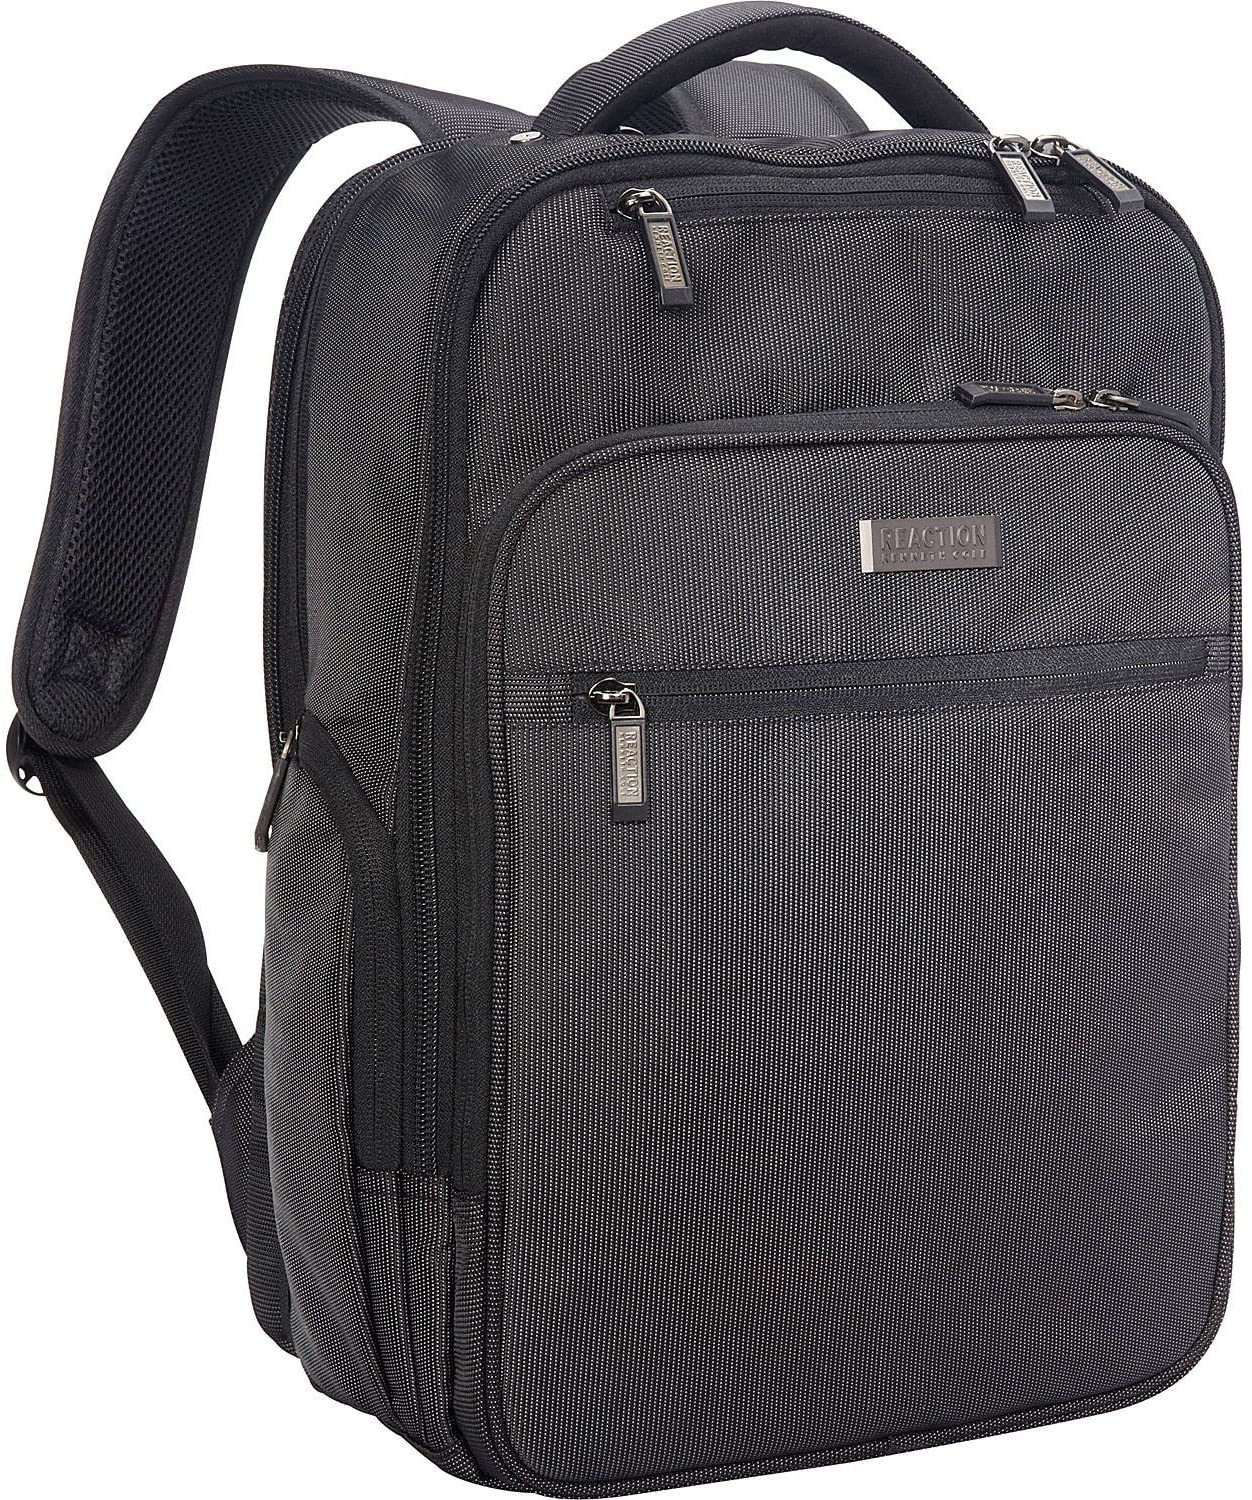 Kenneth Cole Reaction Brooklyn Commuter Backpack Slim